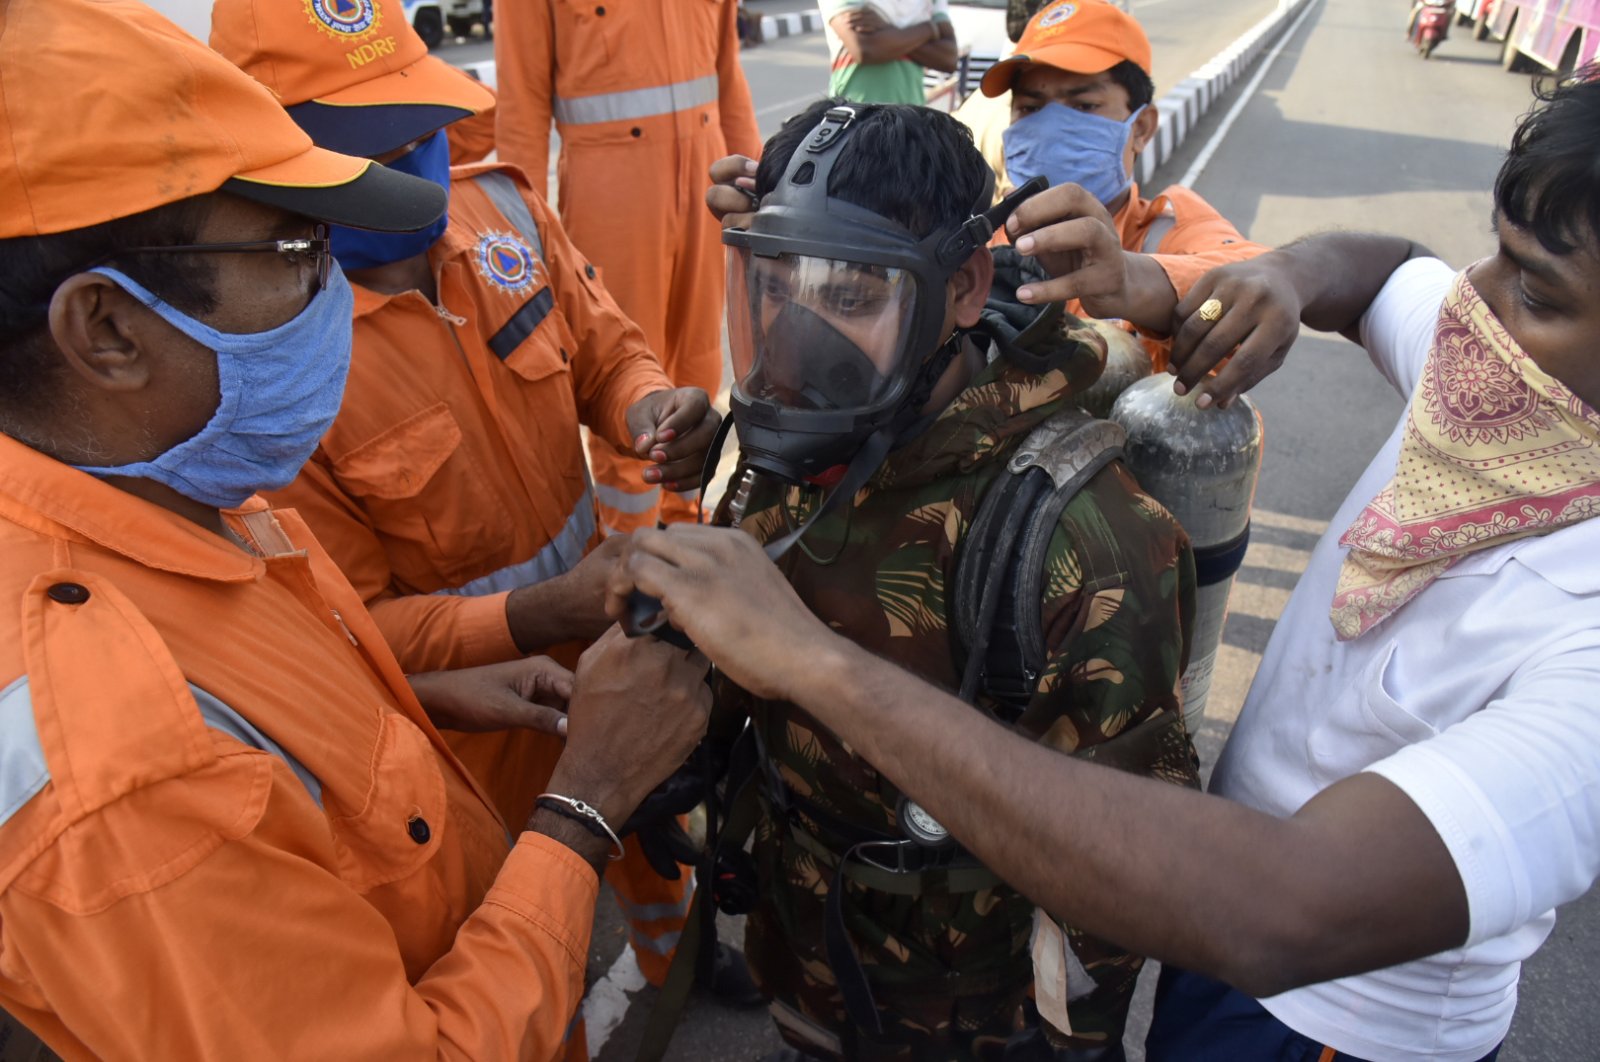 A National Disaster Response Force (NDRF) soldier is fitted with gear before he proceeds to the area from where chemical gas leaked in Vishakhapatnam, India, Thursday, May 7, 2020. (AP Photo)